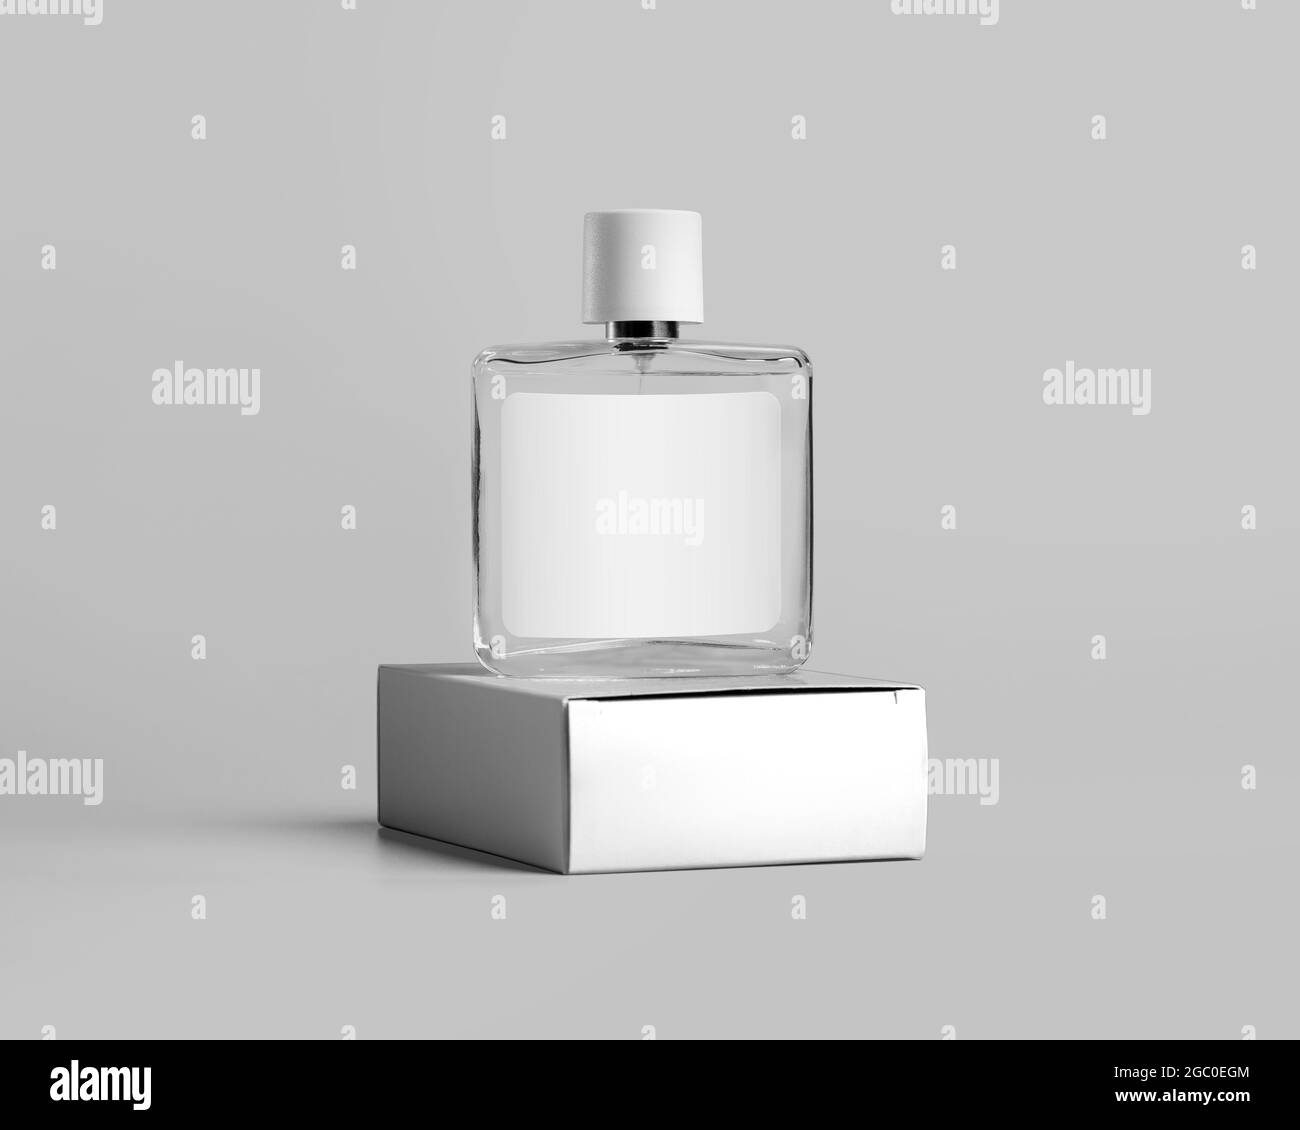 Black Fragrance Perfume Bottle Mockup Stock Photo, Picture and